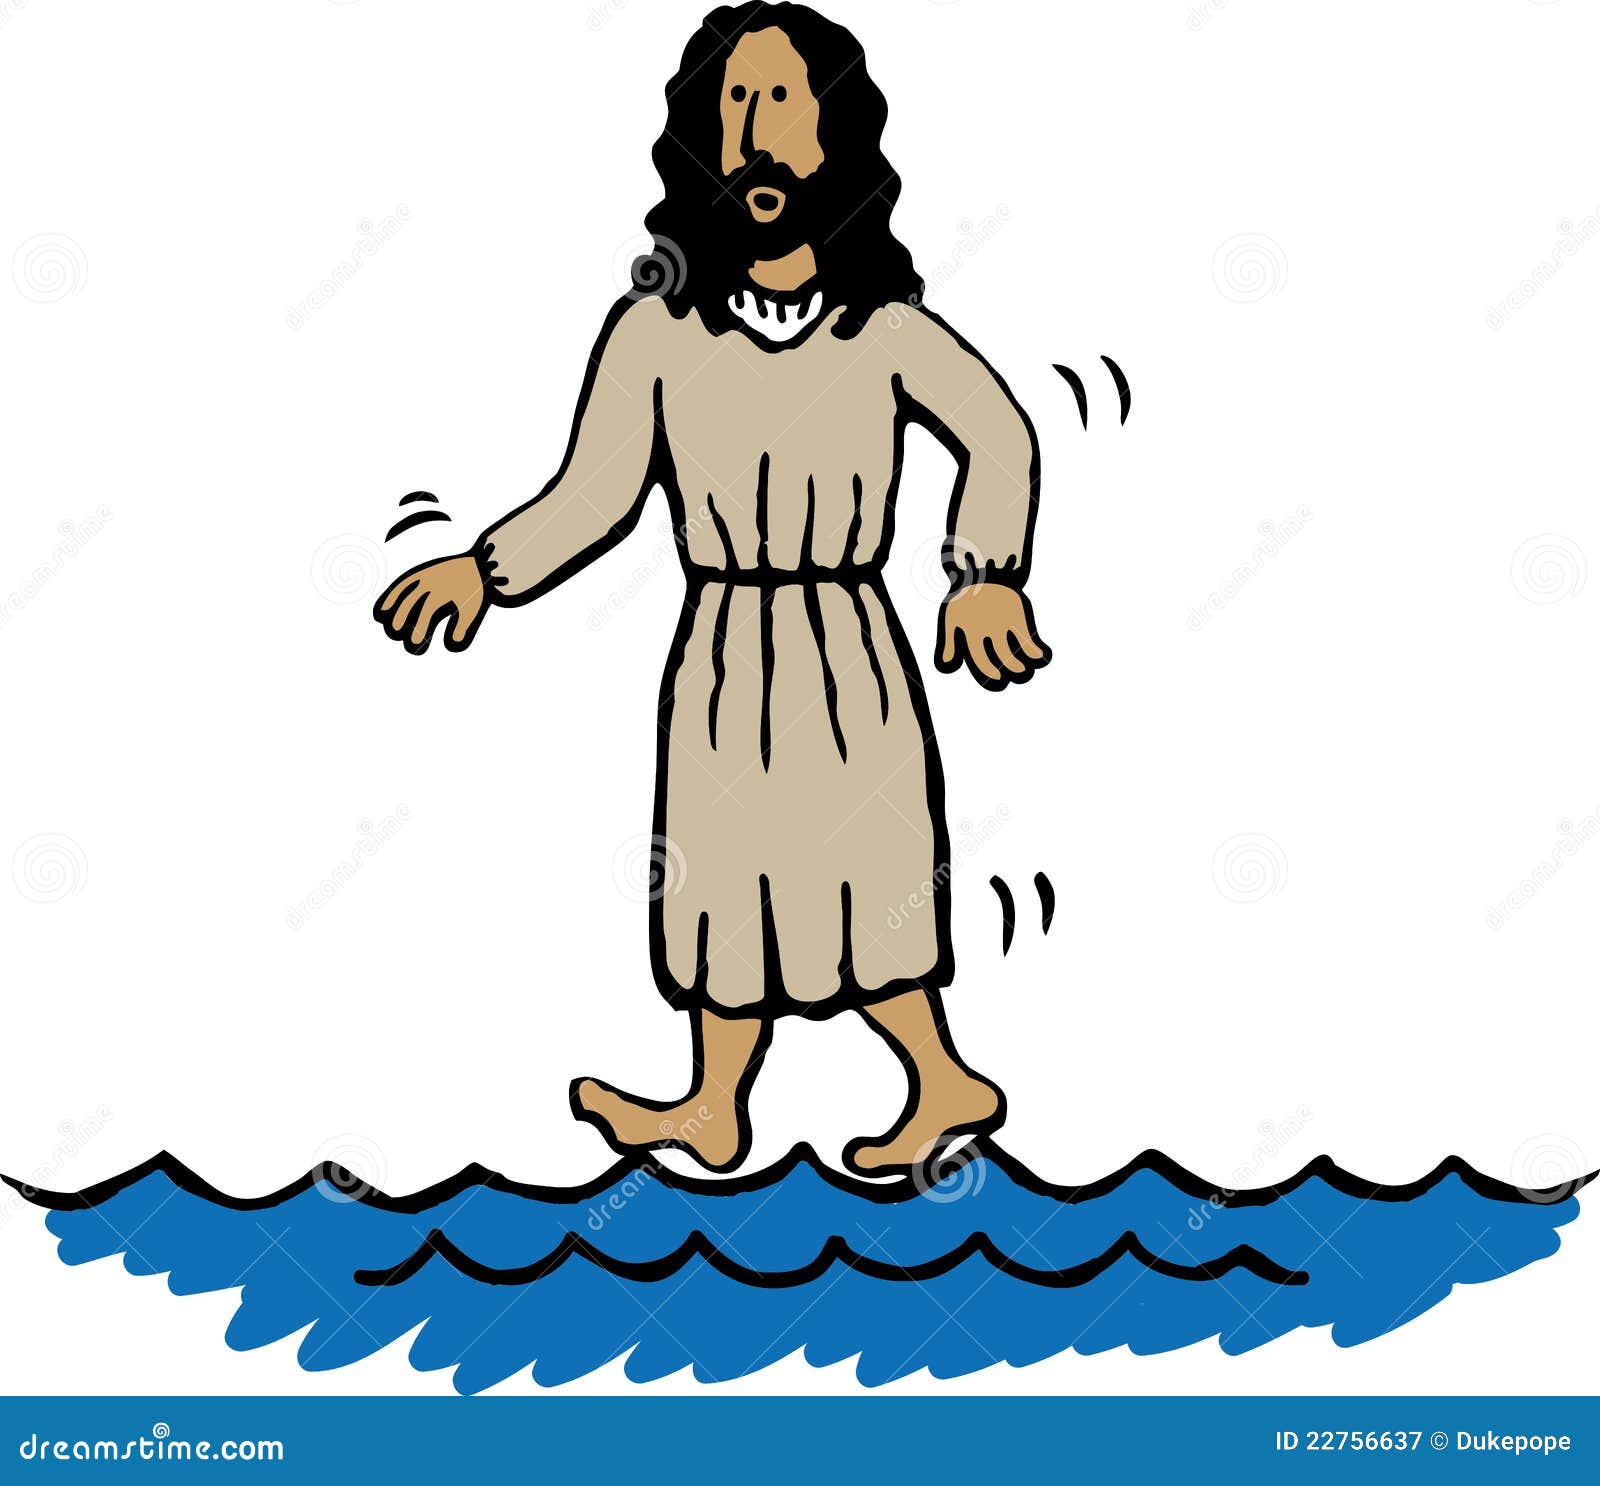 clipart of jesus performing miracles - photo #6